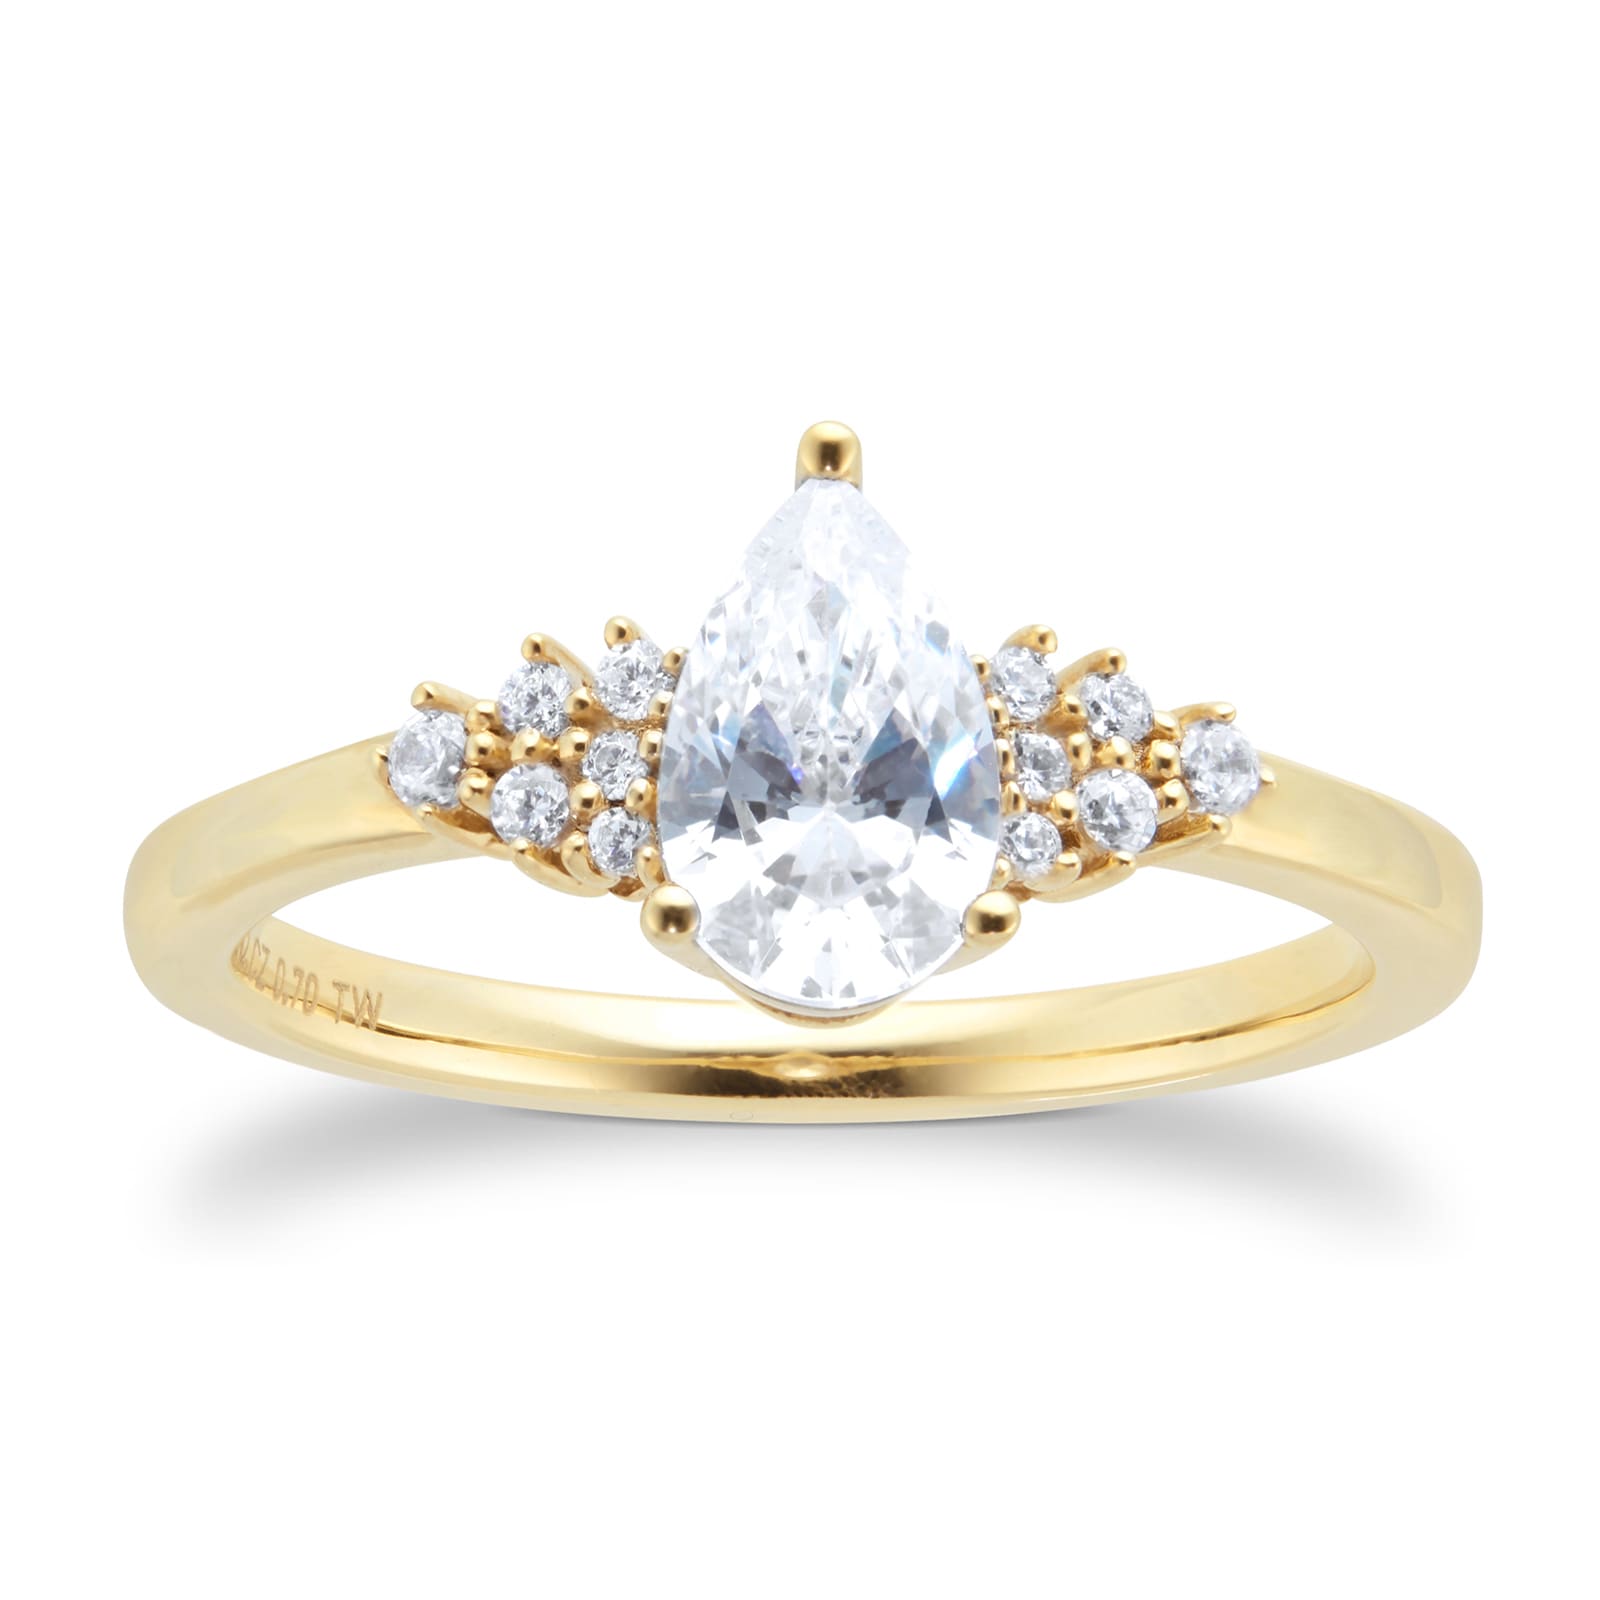 18ct Yellow Gold 0.70cttw Diamond Pear Engagement Ring - Ring Size Q